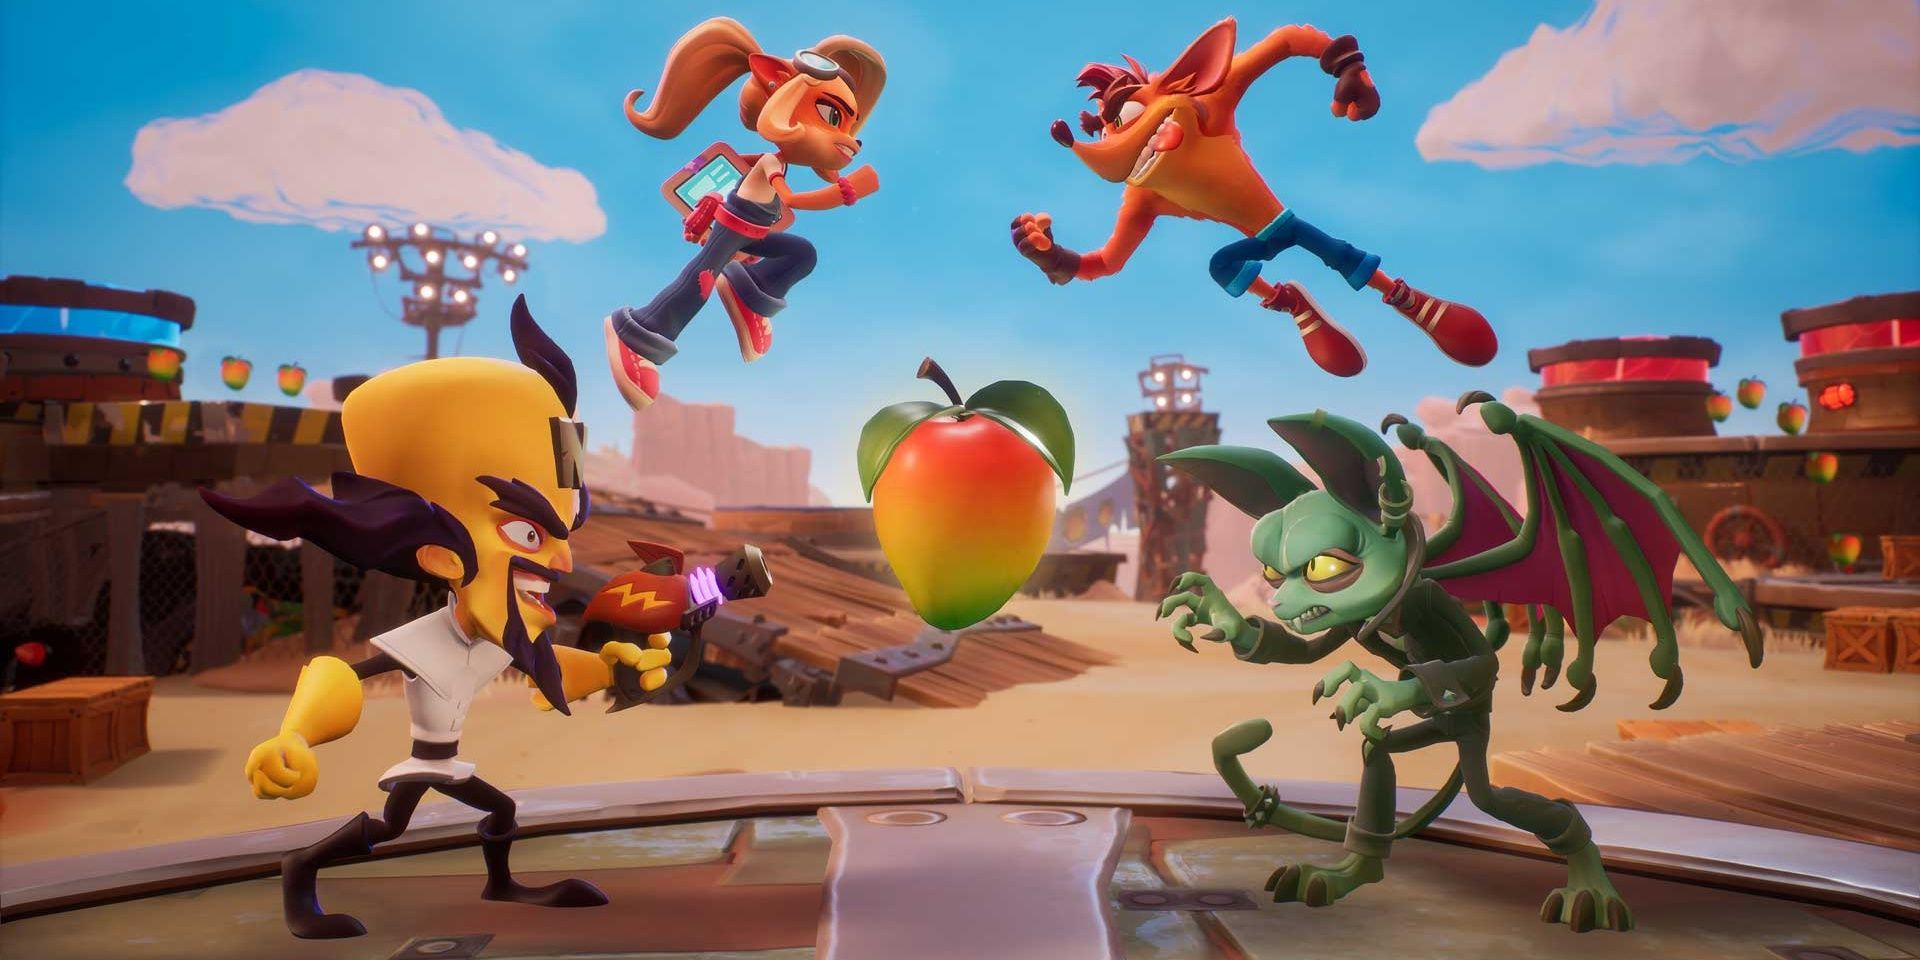 A Wumpa Fruit floats in the middle of the screen while Coco and Crash leap at each other and Cortex points a gun at Catbat